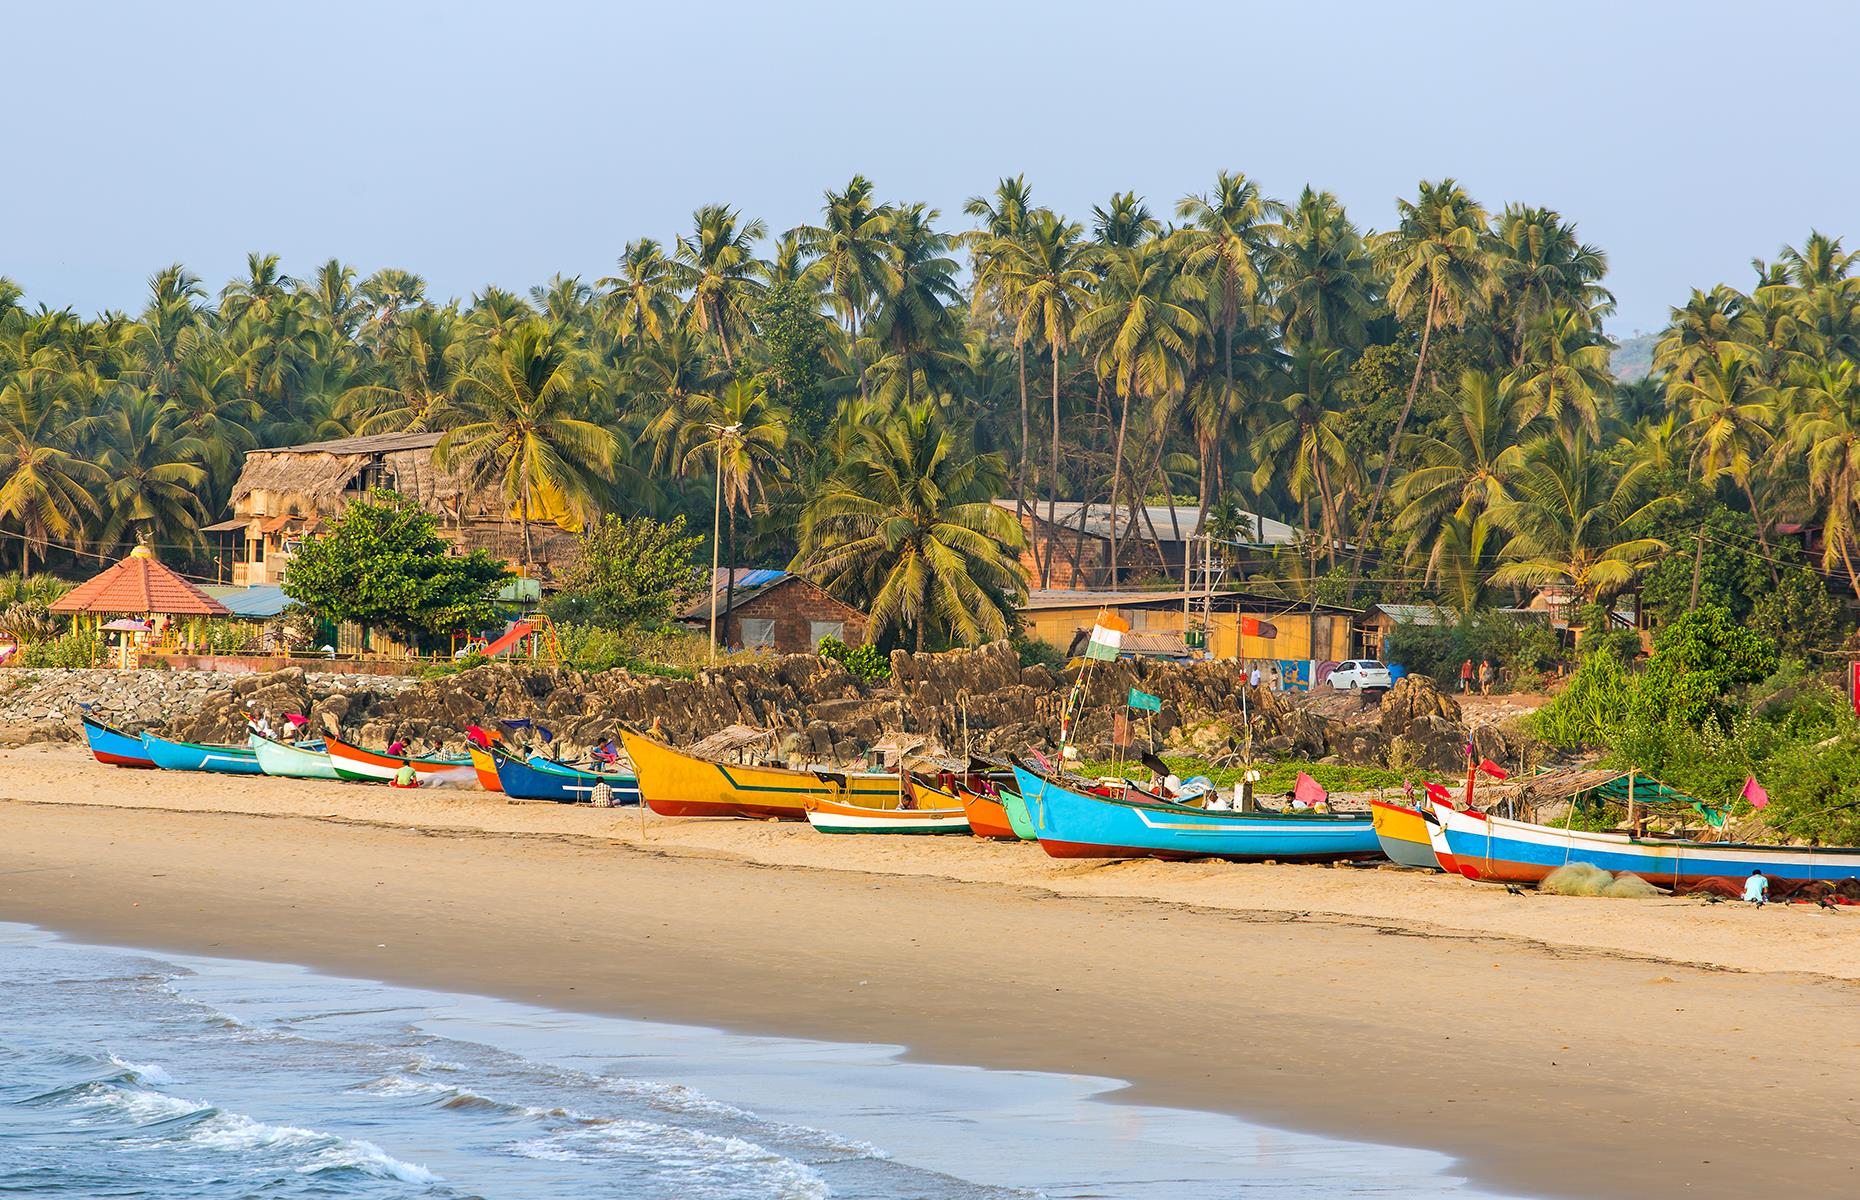 Known to Indians as a sacred pilgrimage site, Gokarna has a different appeal to foreigners: its wide, sandy beaches. Backed by palms, the glorious fine yellow sand here is lapped by the warm Indian Ocean, and come evening, the sunsets are spectacular. Stop here for a coconut water fresh from the tree and watch the sky blaze myriad colors at dusk.